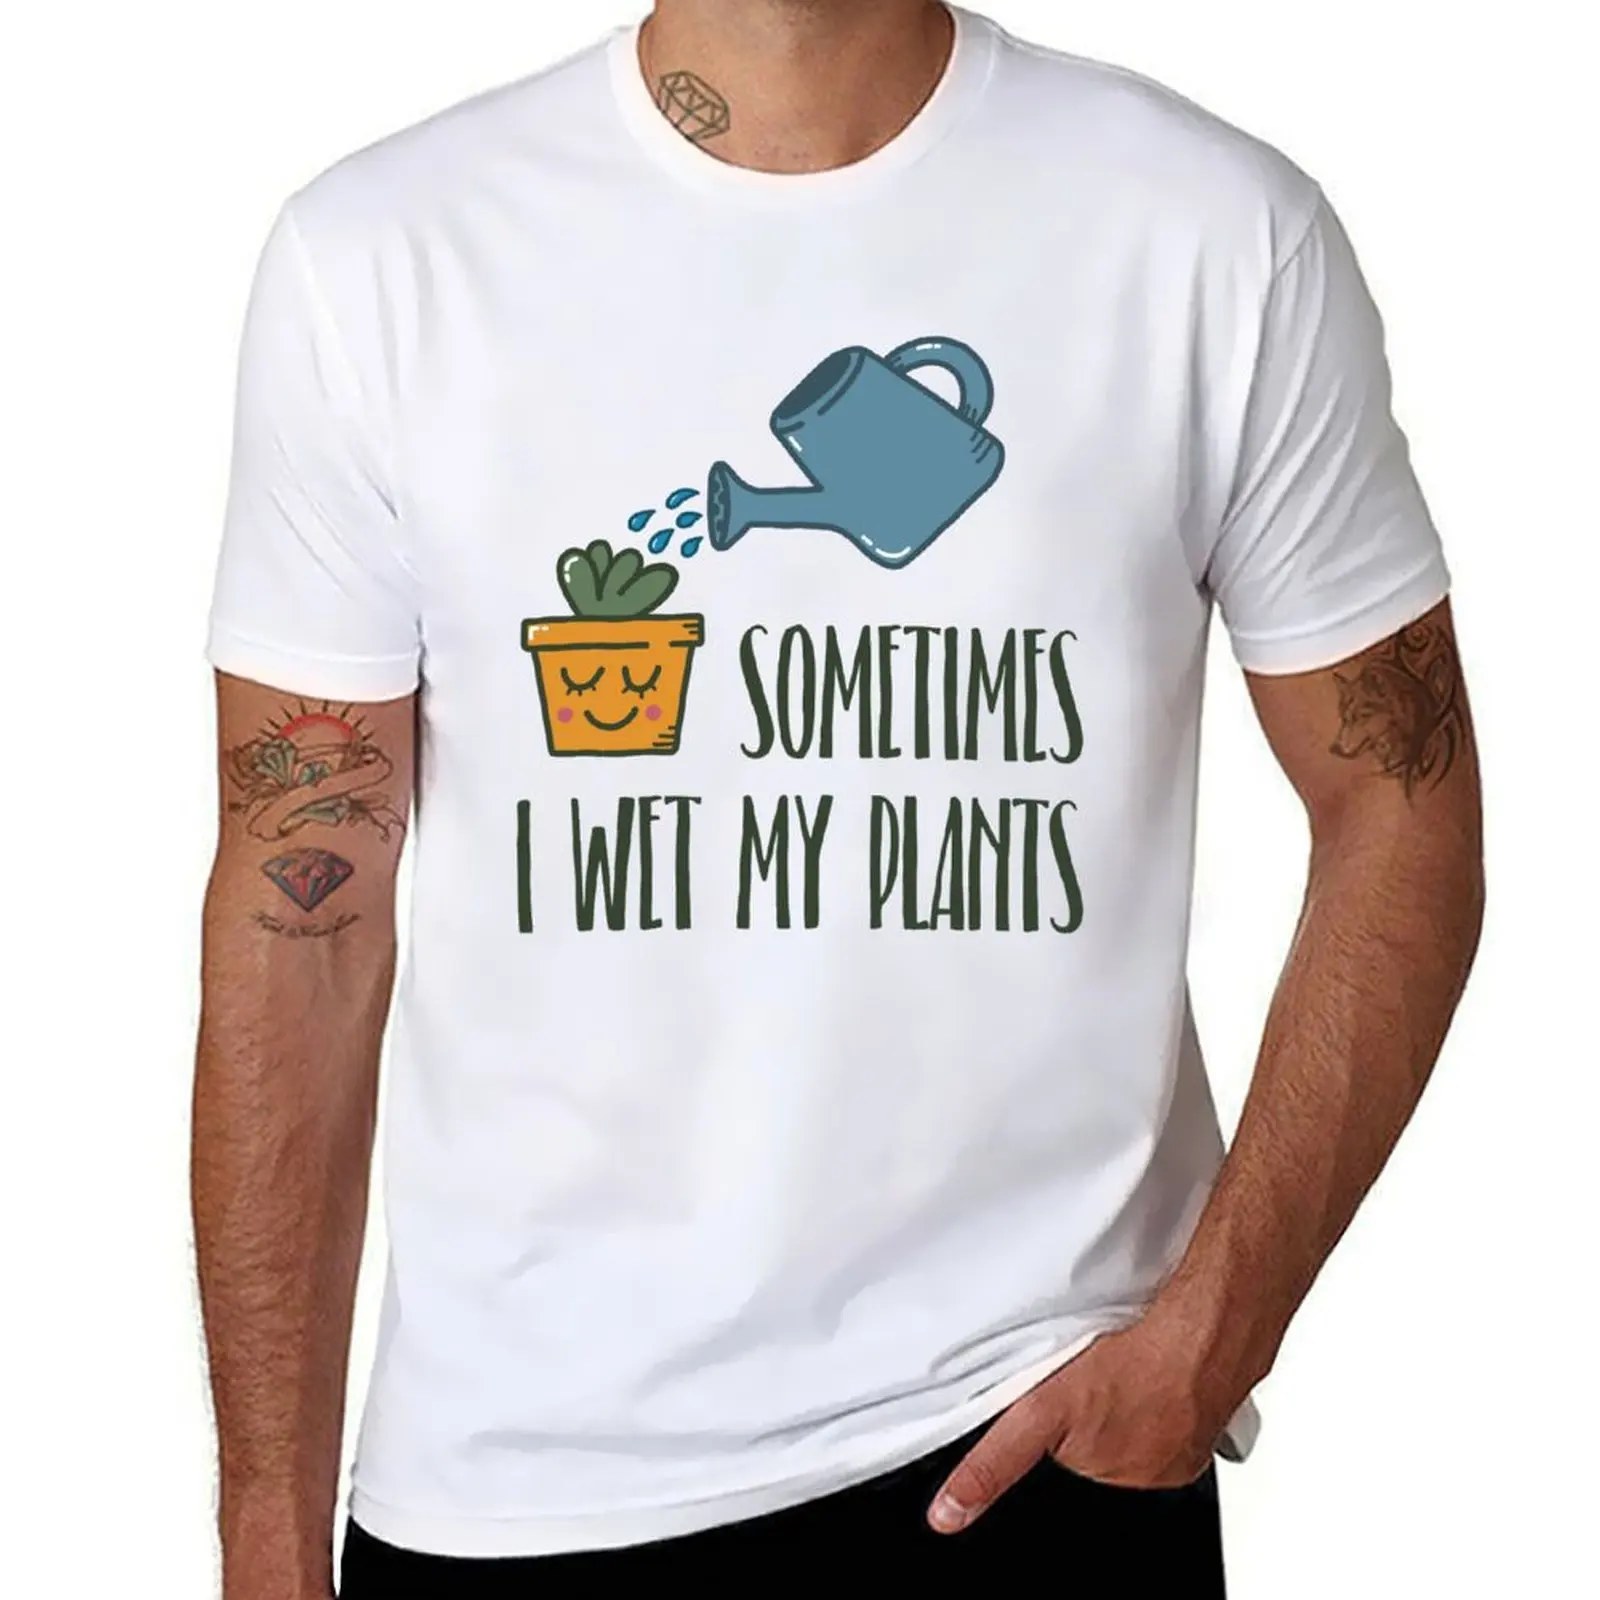 

Sometimes I Wet My Plants - Funny Gardening Gift T-shirt oversizeds anime men graphic t shirts